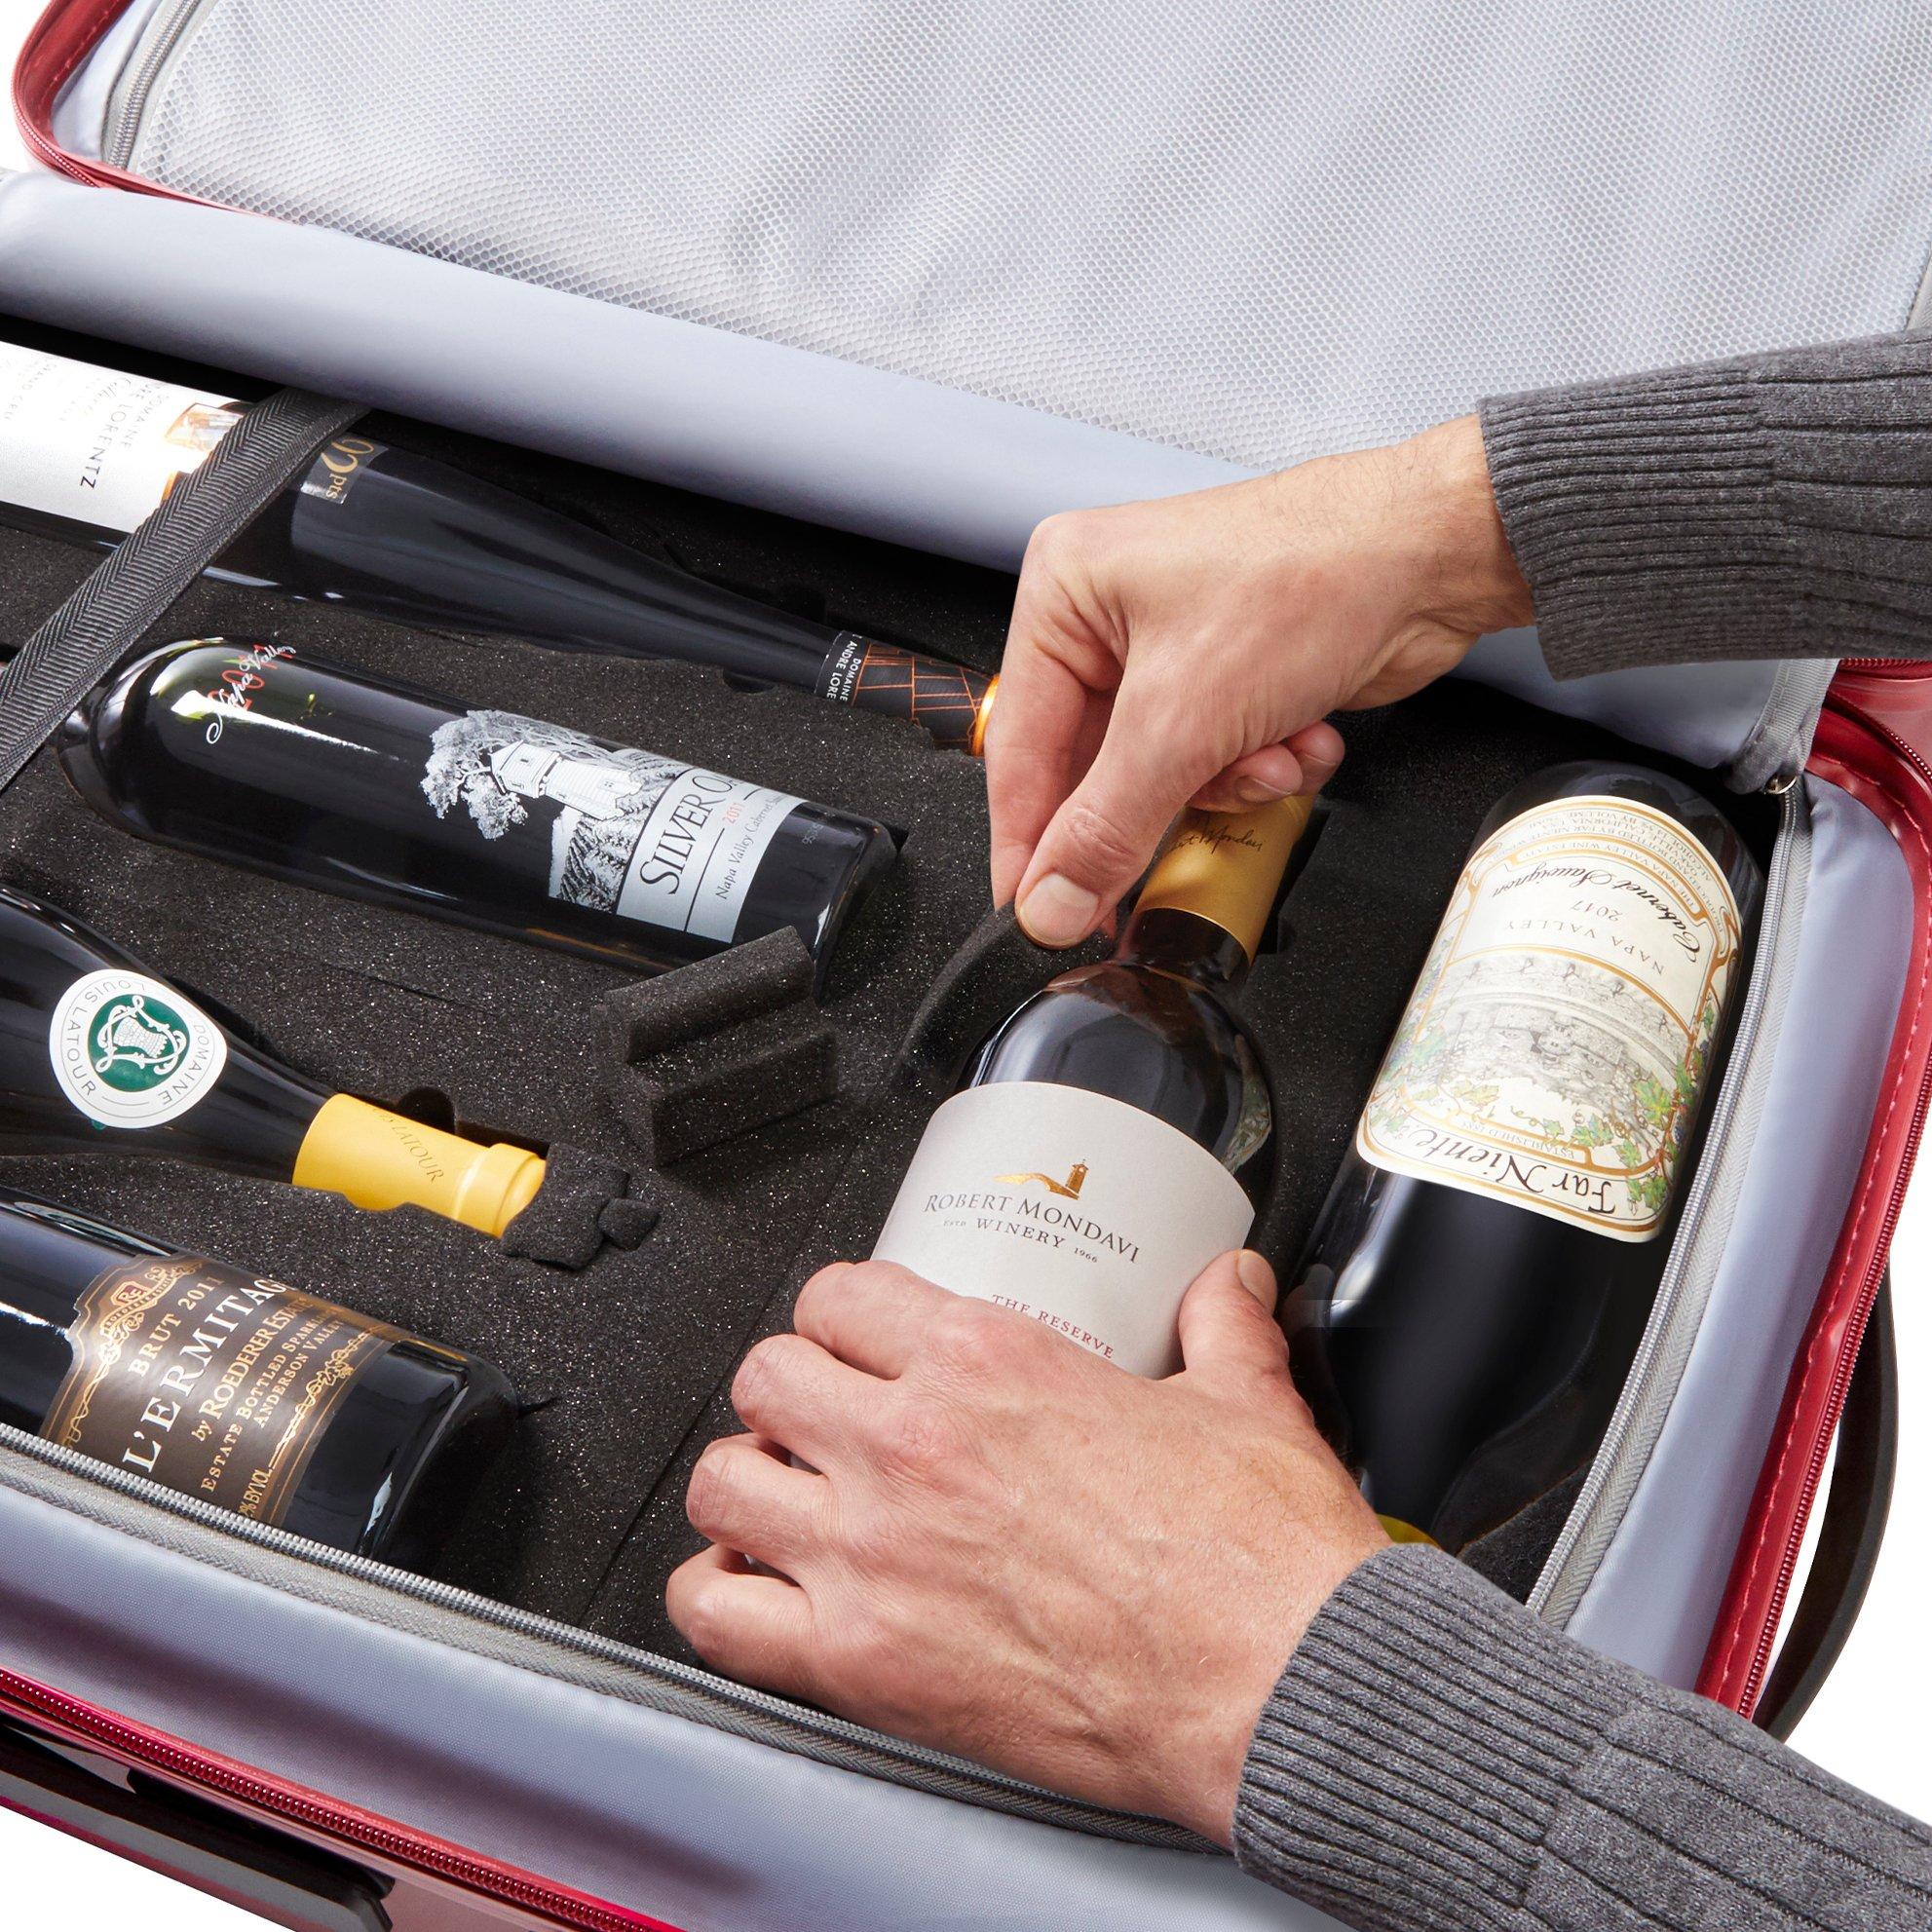 More than just wine: Bags for travel